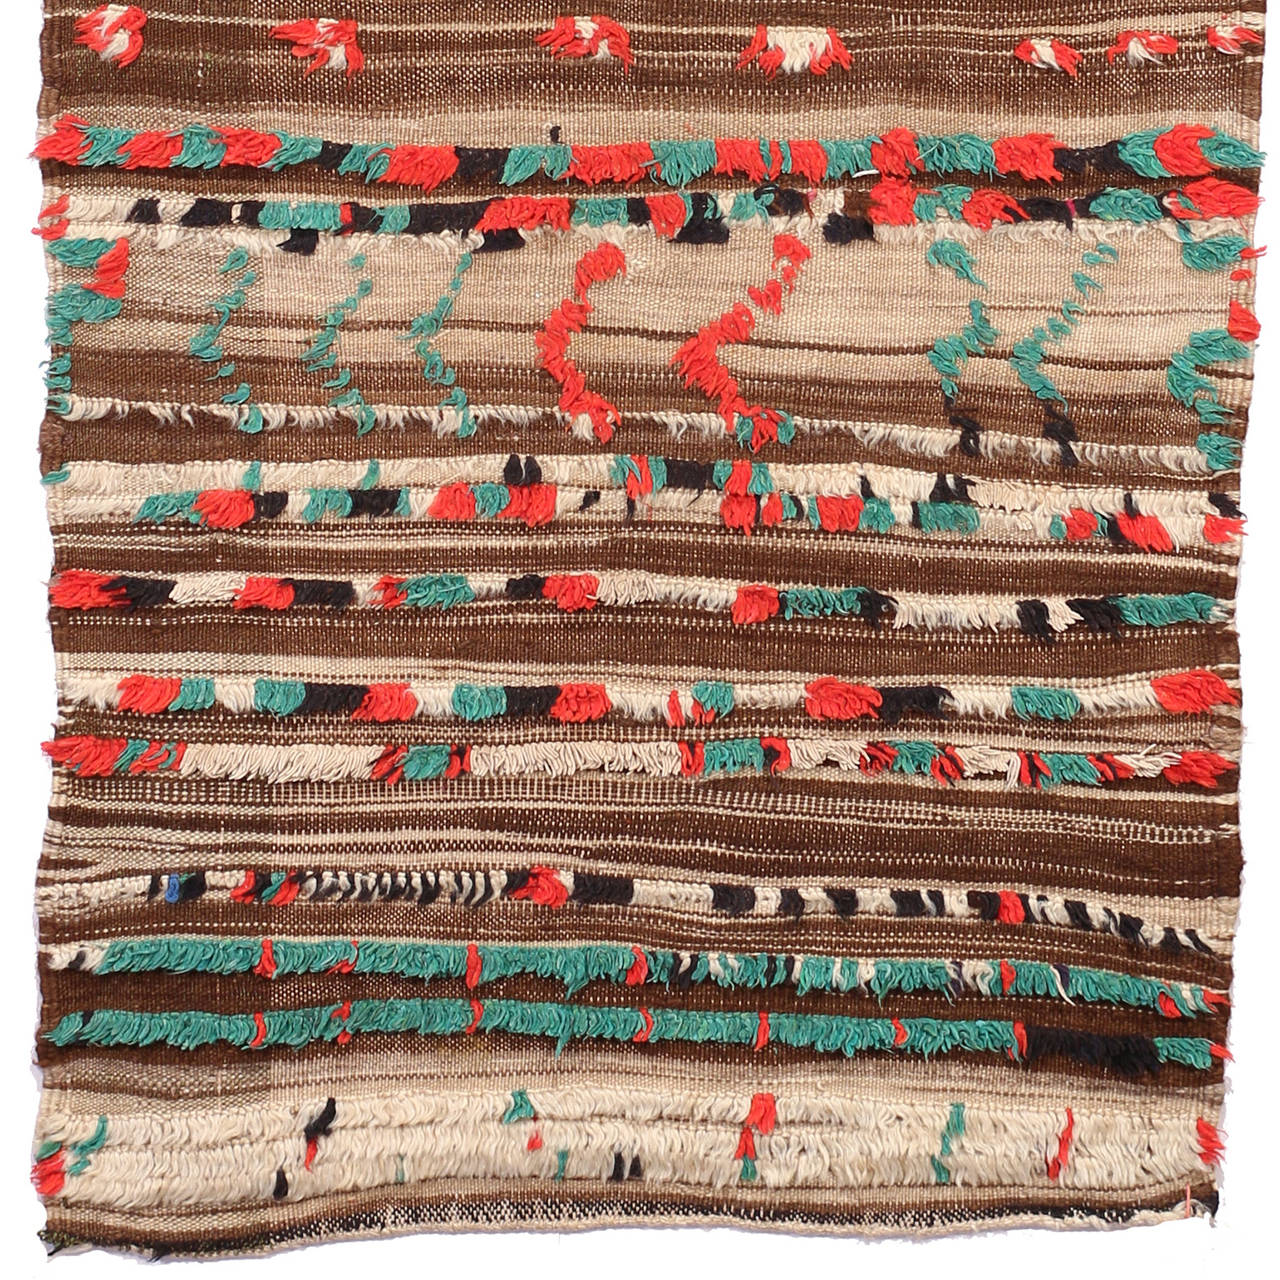 The background of this exciting textile is a soft kilim with many brown shades. Like a relief red, green, white and black knots are partially incorporated and built a lively and colorful surface.